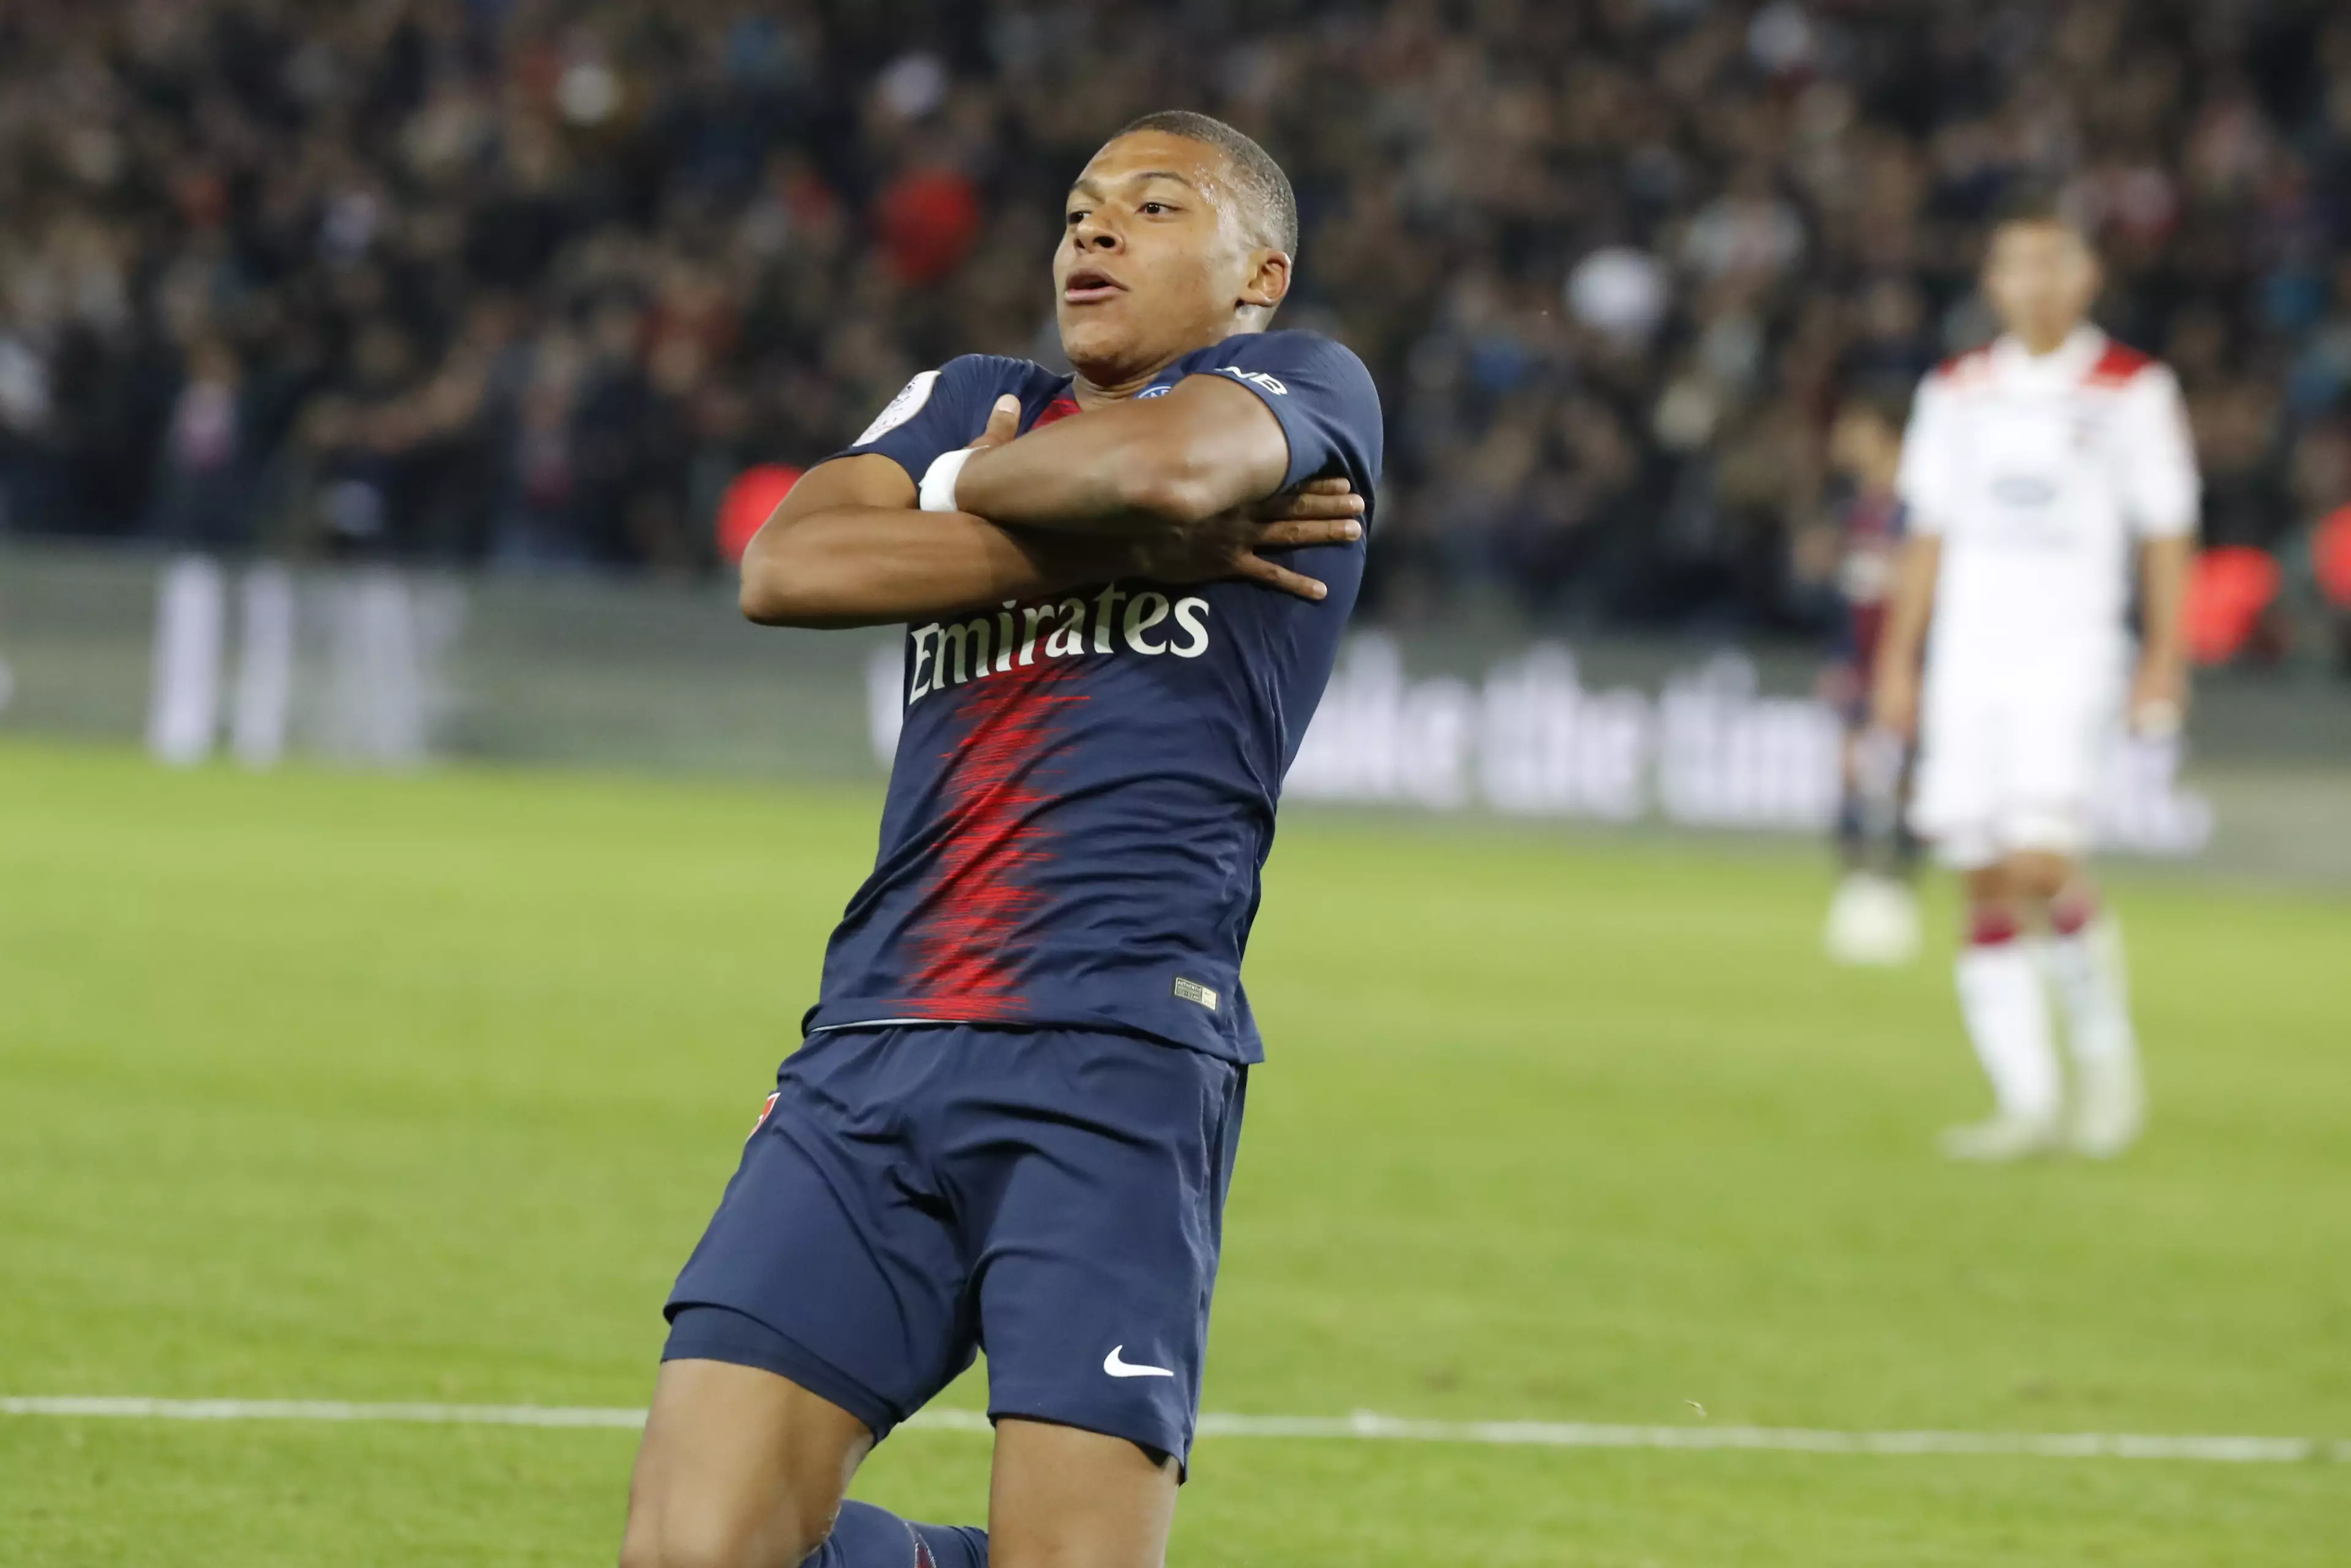 PSG forward Kylian Mbappe often celebrates his goals with his arms folded